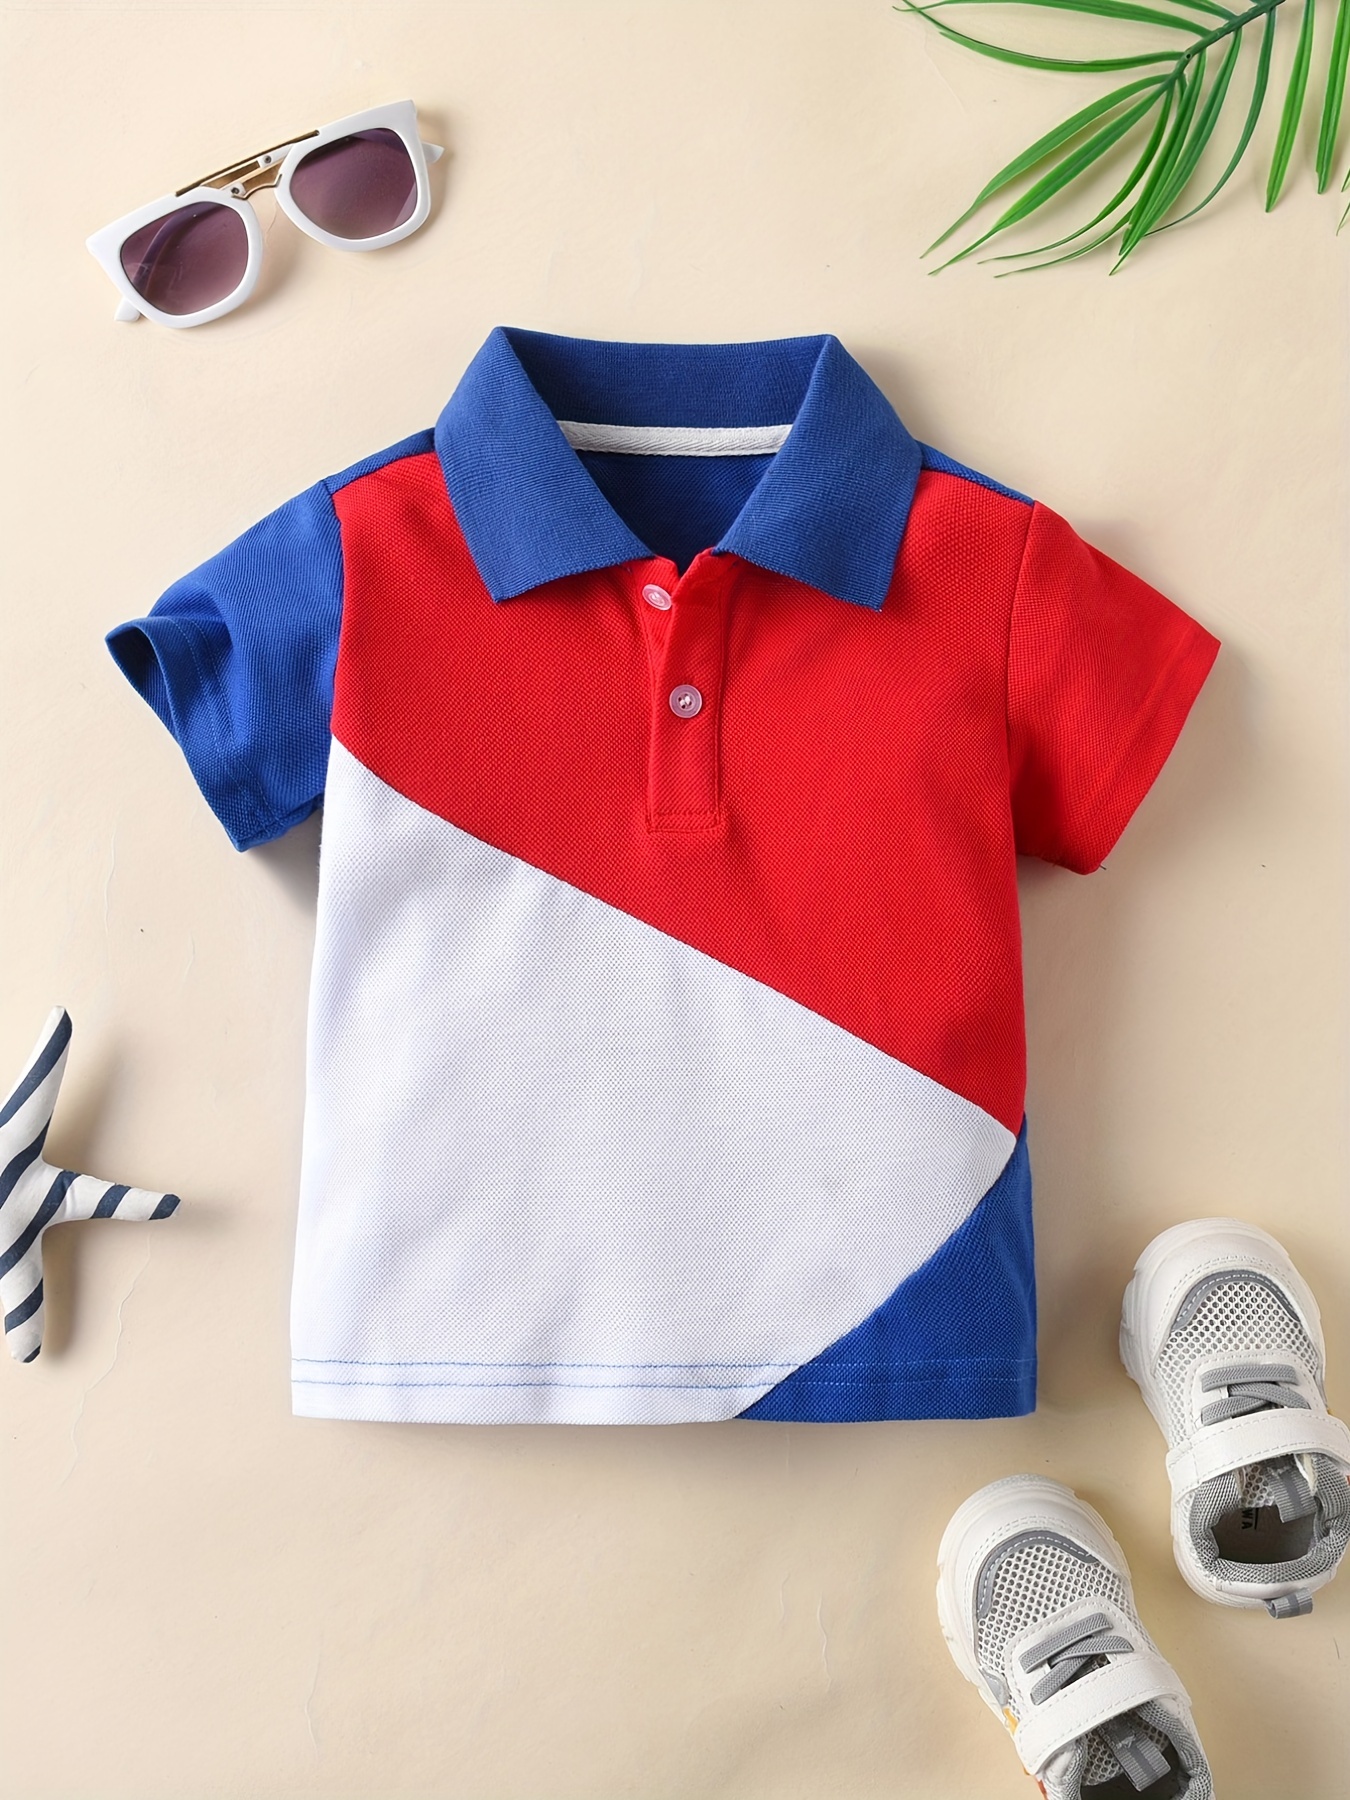 Boys Bear Graphic Short Sleeves Button Up Shirt For Summer Preppy Style  Kids Clothes - Temu